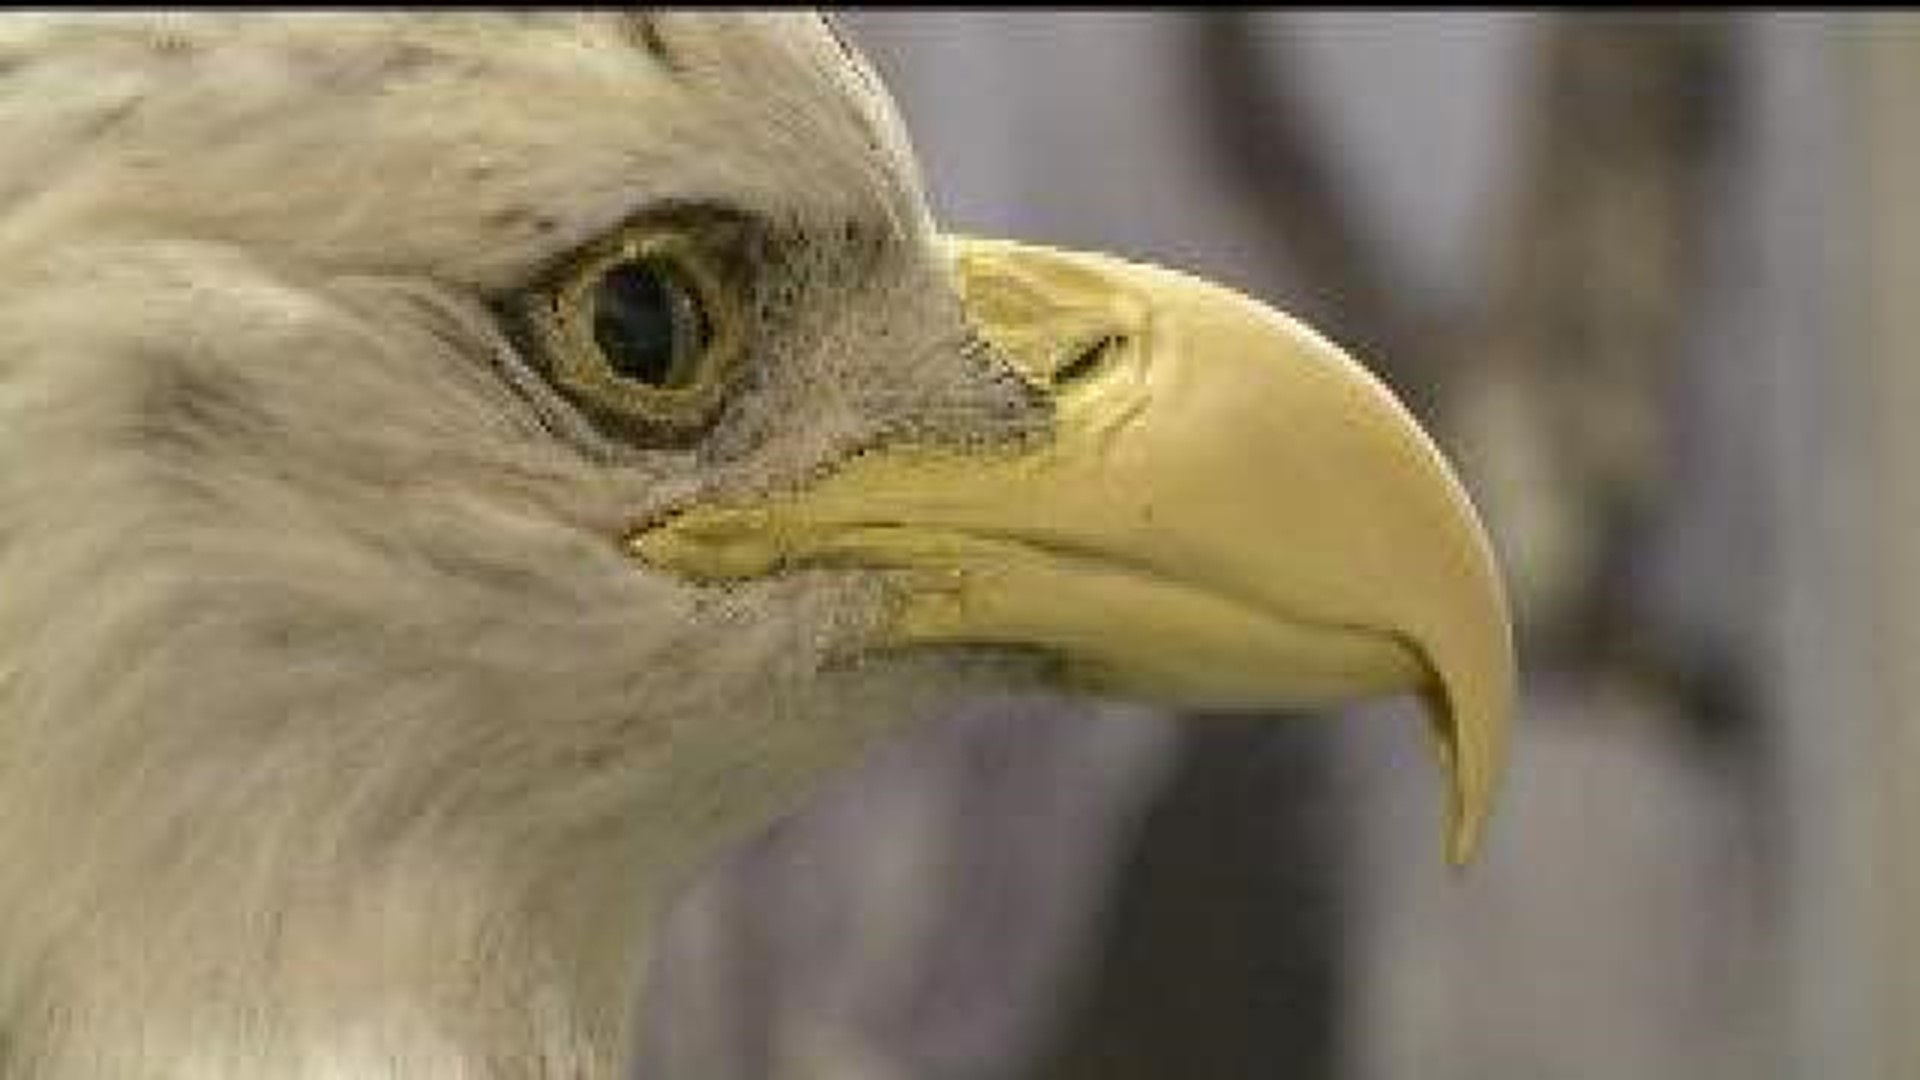 Study shows eagles dying from lead poisoning